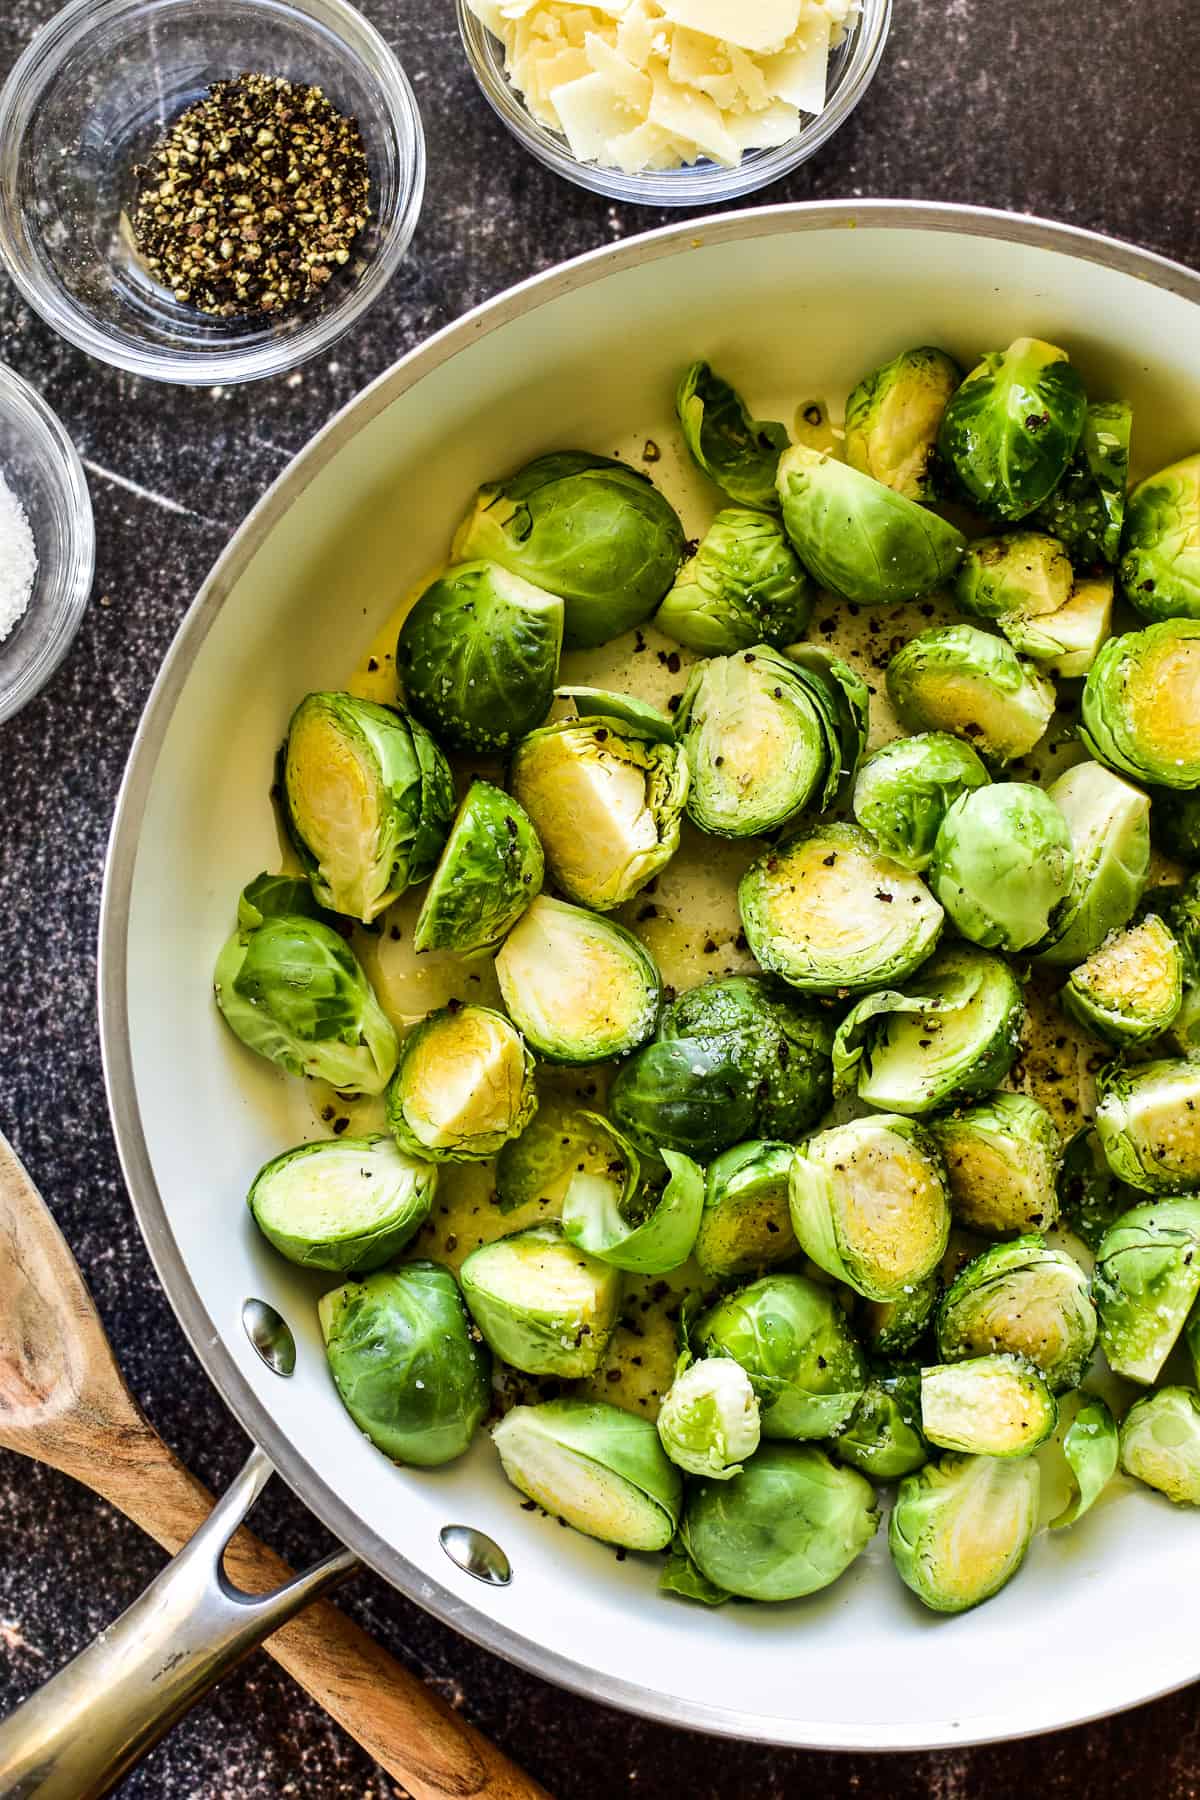 Sauteed Brussel Sprouts ingredients combined in skillet